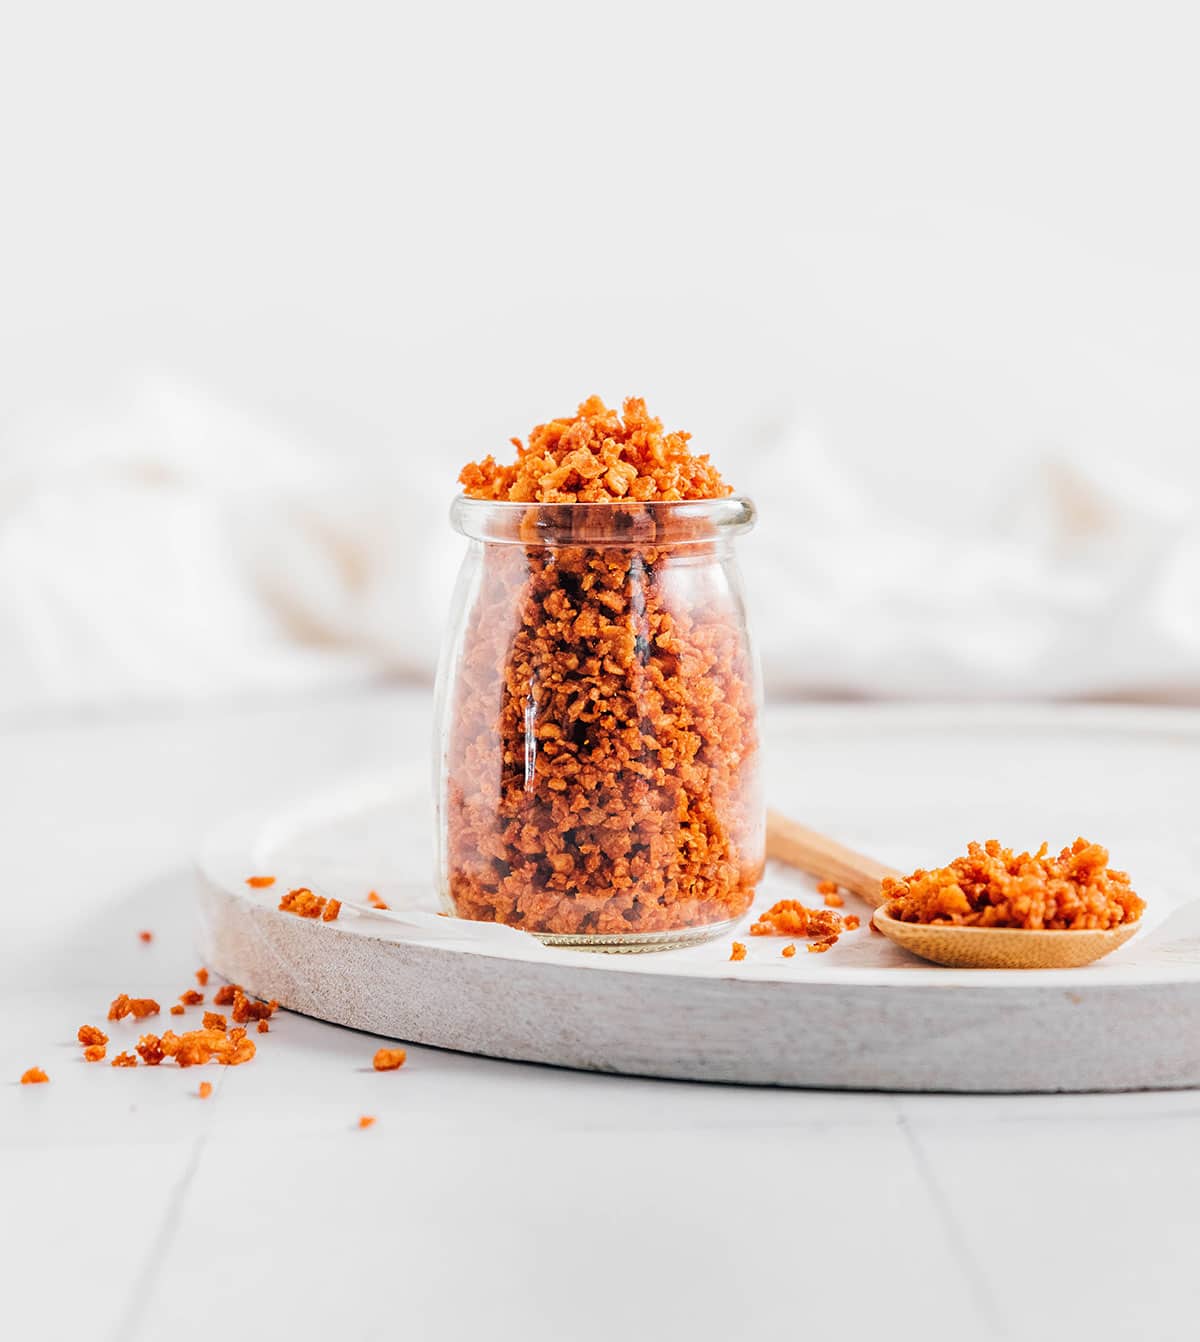 Vegan bacon bits in a glass jar on a white background